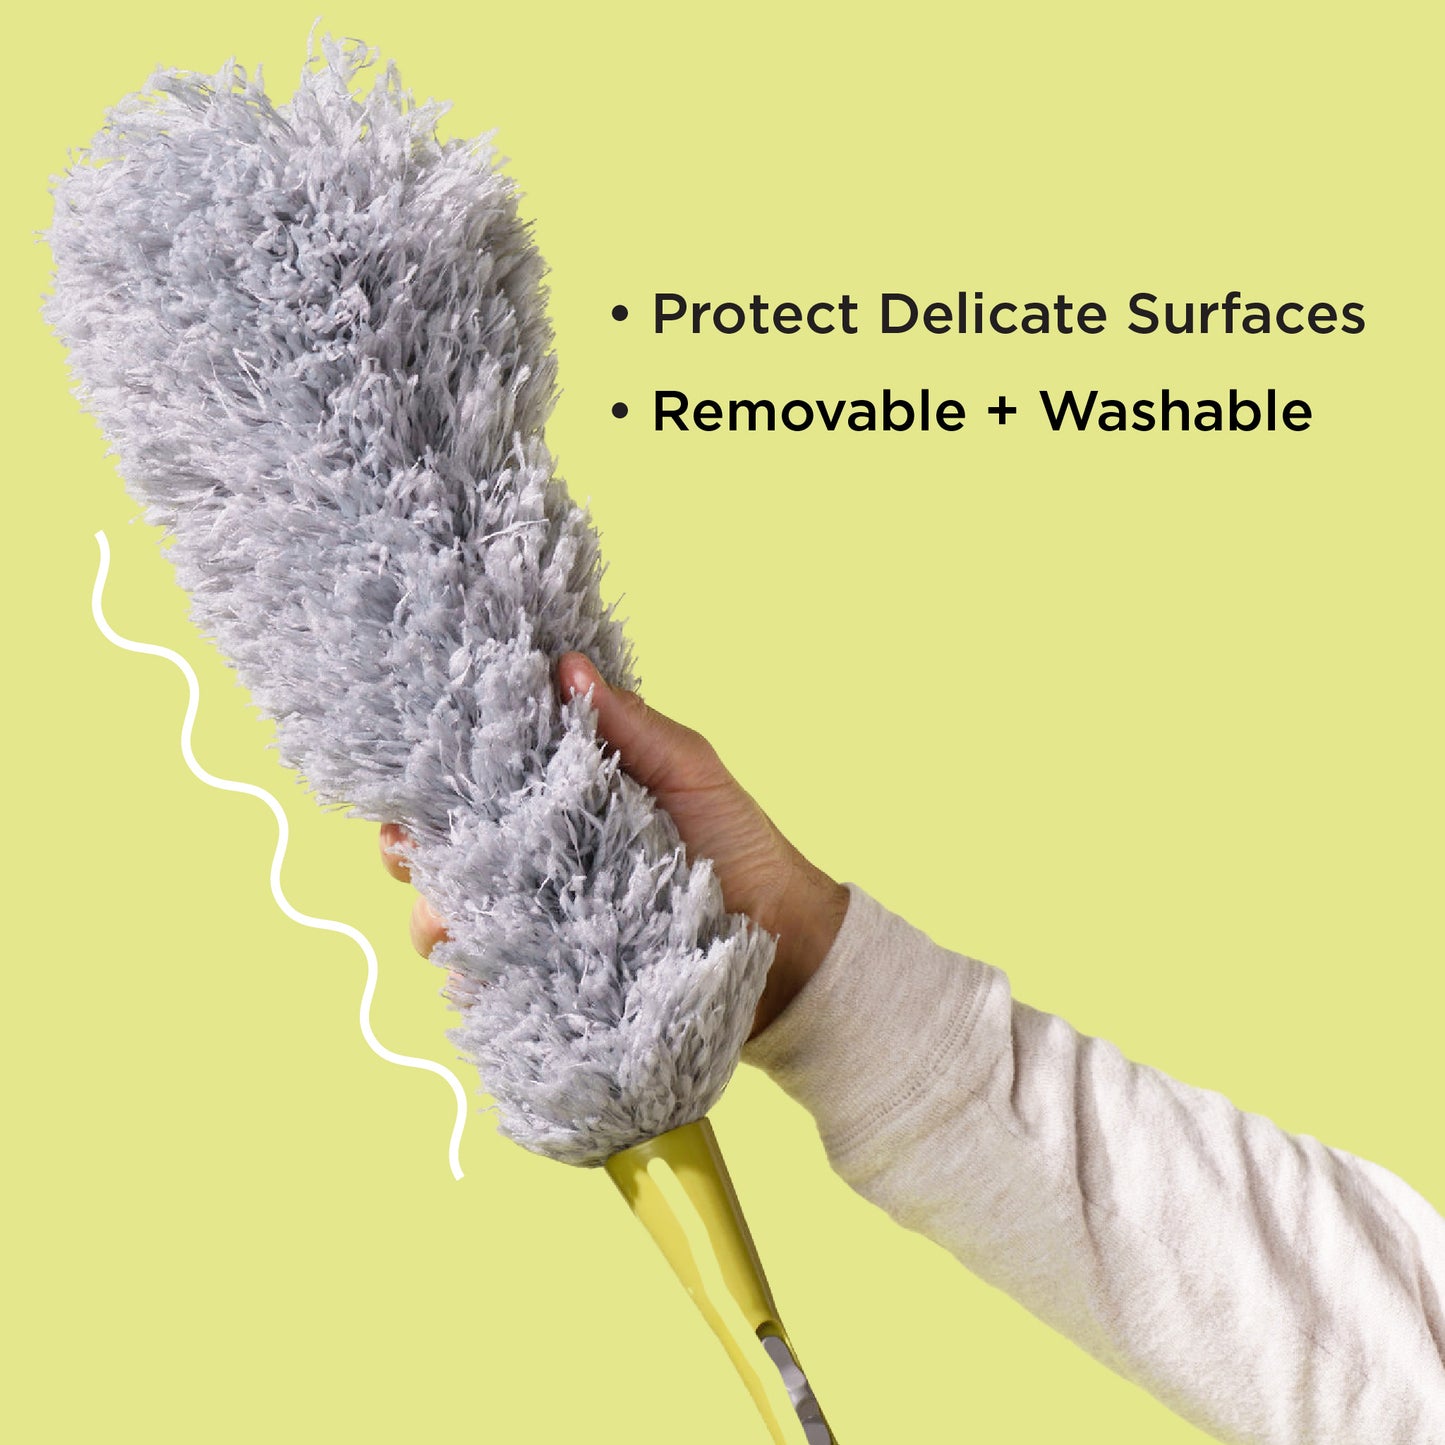 Protect Delicate Surfaces with a Microfiber Duster